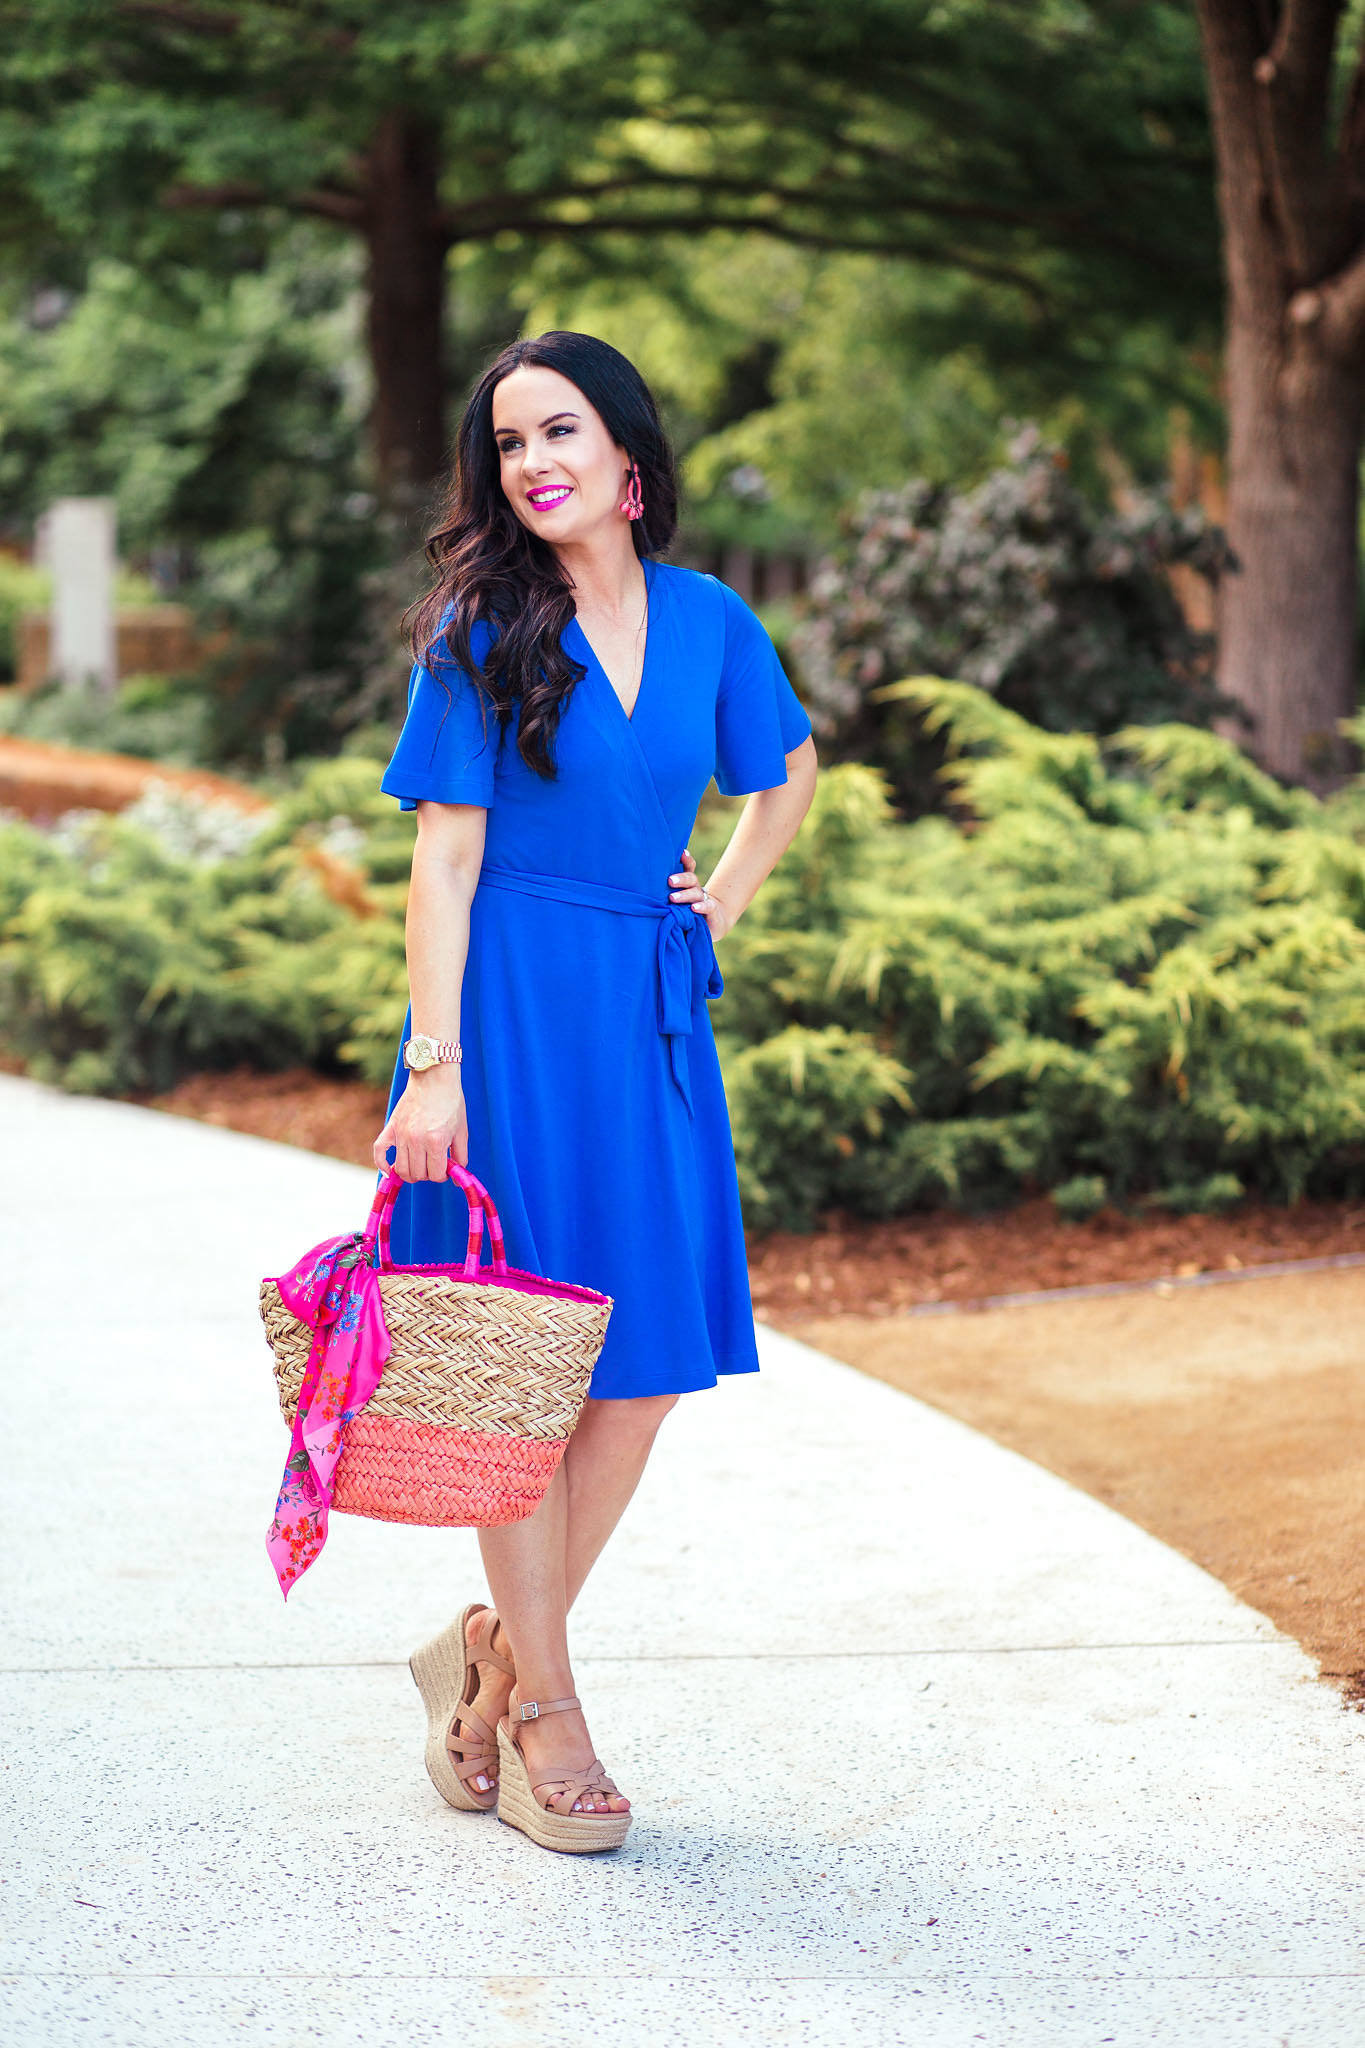 5-dress-trends-to-try-this-summer-ann-taylor-yellow-blue-wrap-dresses